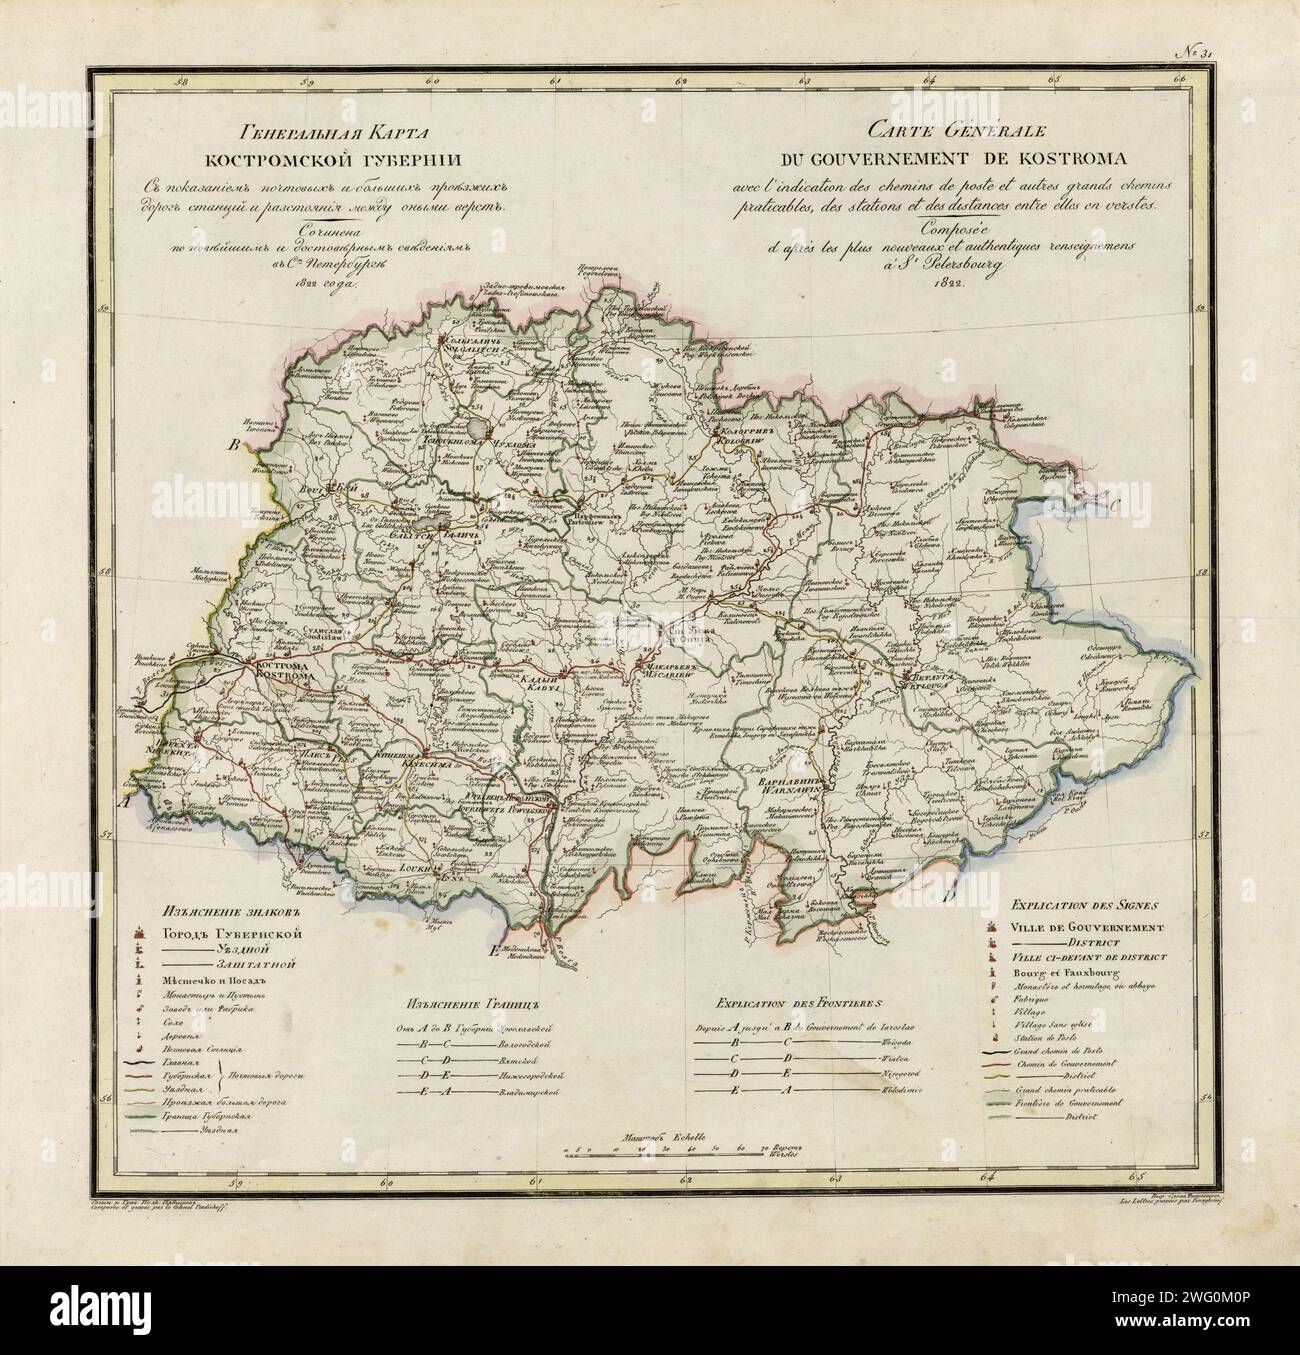 General Map of Kostroma Province: Showing Postal and Major Roads, Stations and the Distance in Versts between Them, 1822. This 1822 map of Kostroma Provinceis from a larger work,Geograficheskii atlas Rossiiskoi imperii, tsarstva Pol'skogo i velikogo kniazhestva Finliandskogo(Geographical atlas of the Russian Empire, the Kingdom of Poland, and the Grand Duchy of Finland), containing 60 maps of the Russian Empire. Compiled and engraved by Colonel V.P. Piadyshev, it reflects the detailed mapping carried out by Russian military cartographers in the first quarter of the 19th century. The map shows Stock Photo